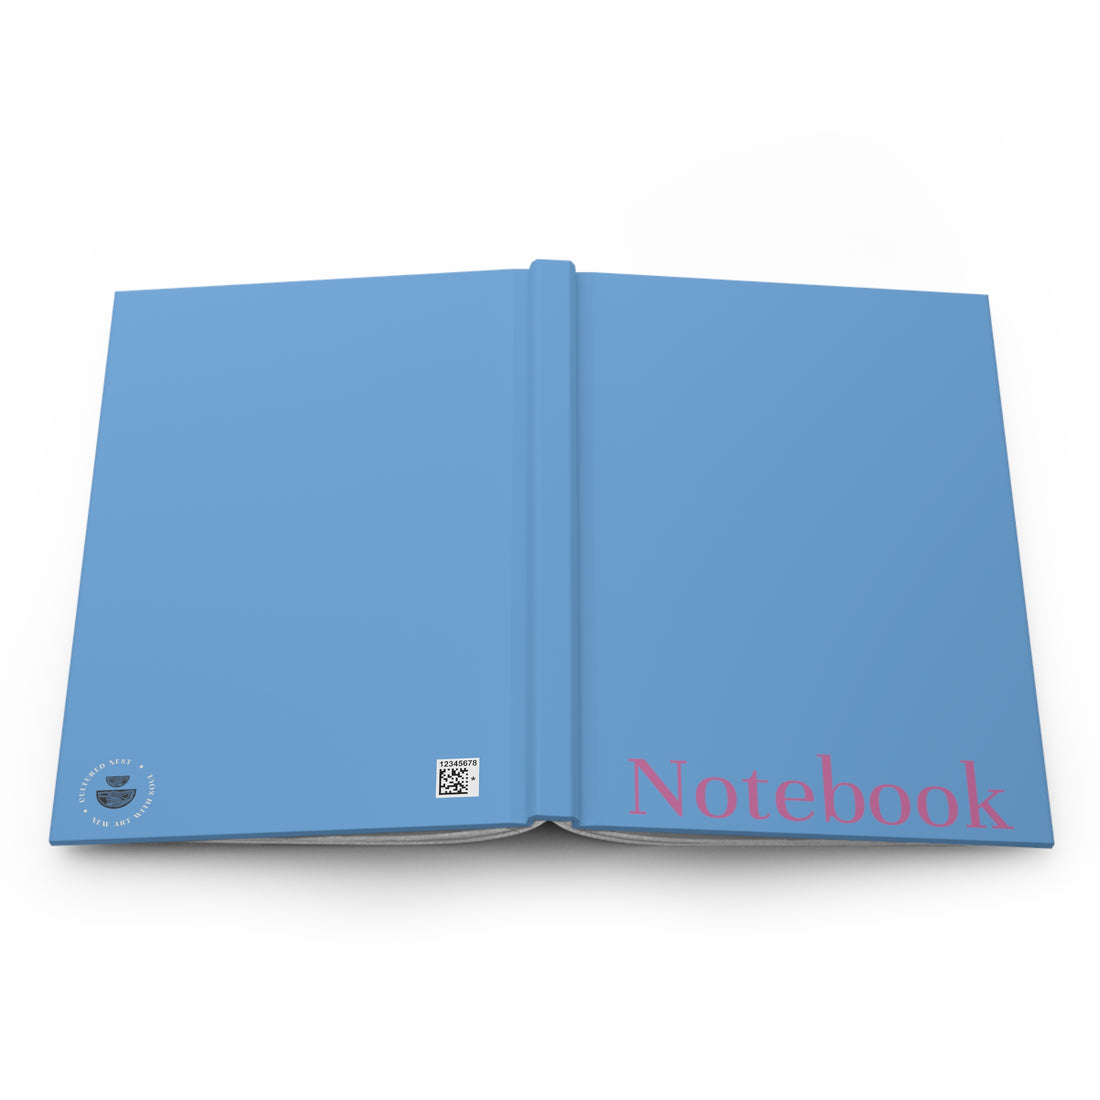 Blue and Pink Notebook, Matte Hardcover Journal